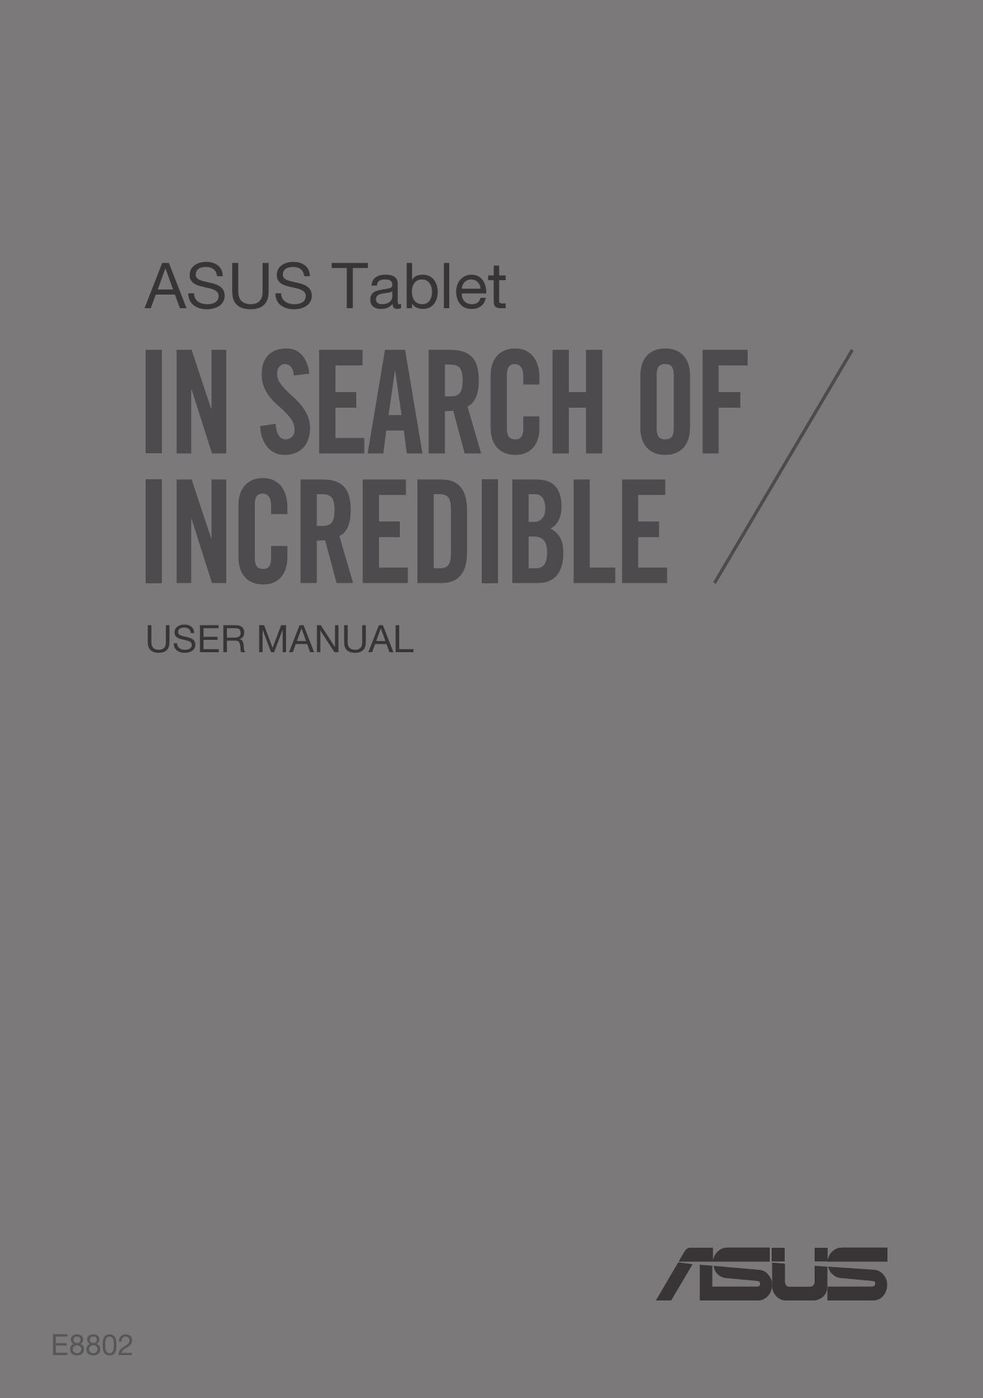 Asus E8802 Graphics Tablet User Manual